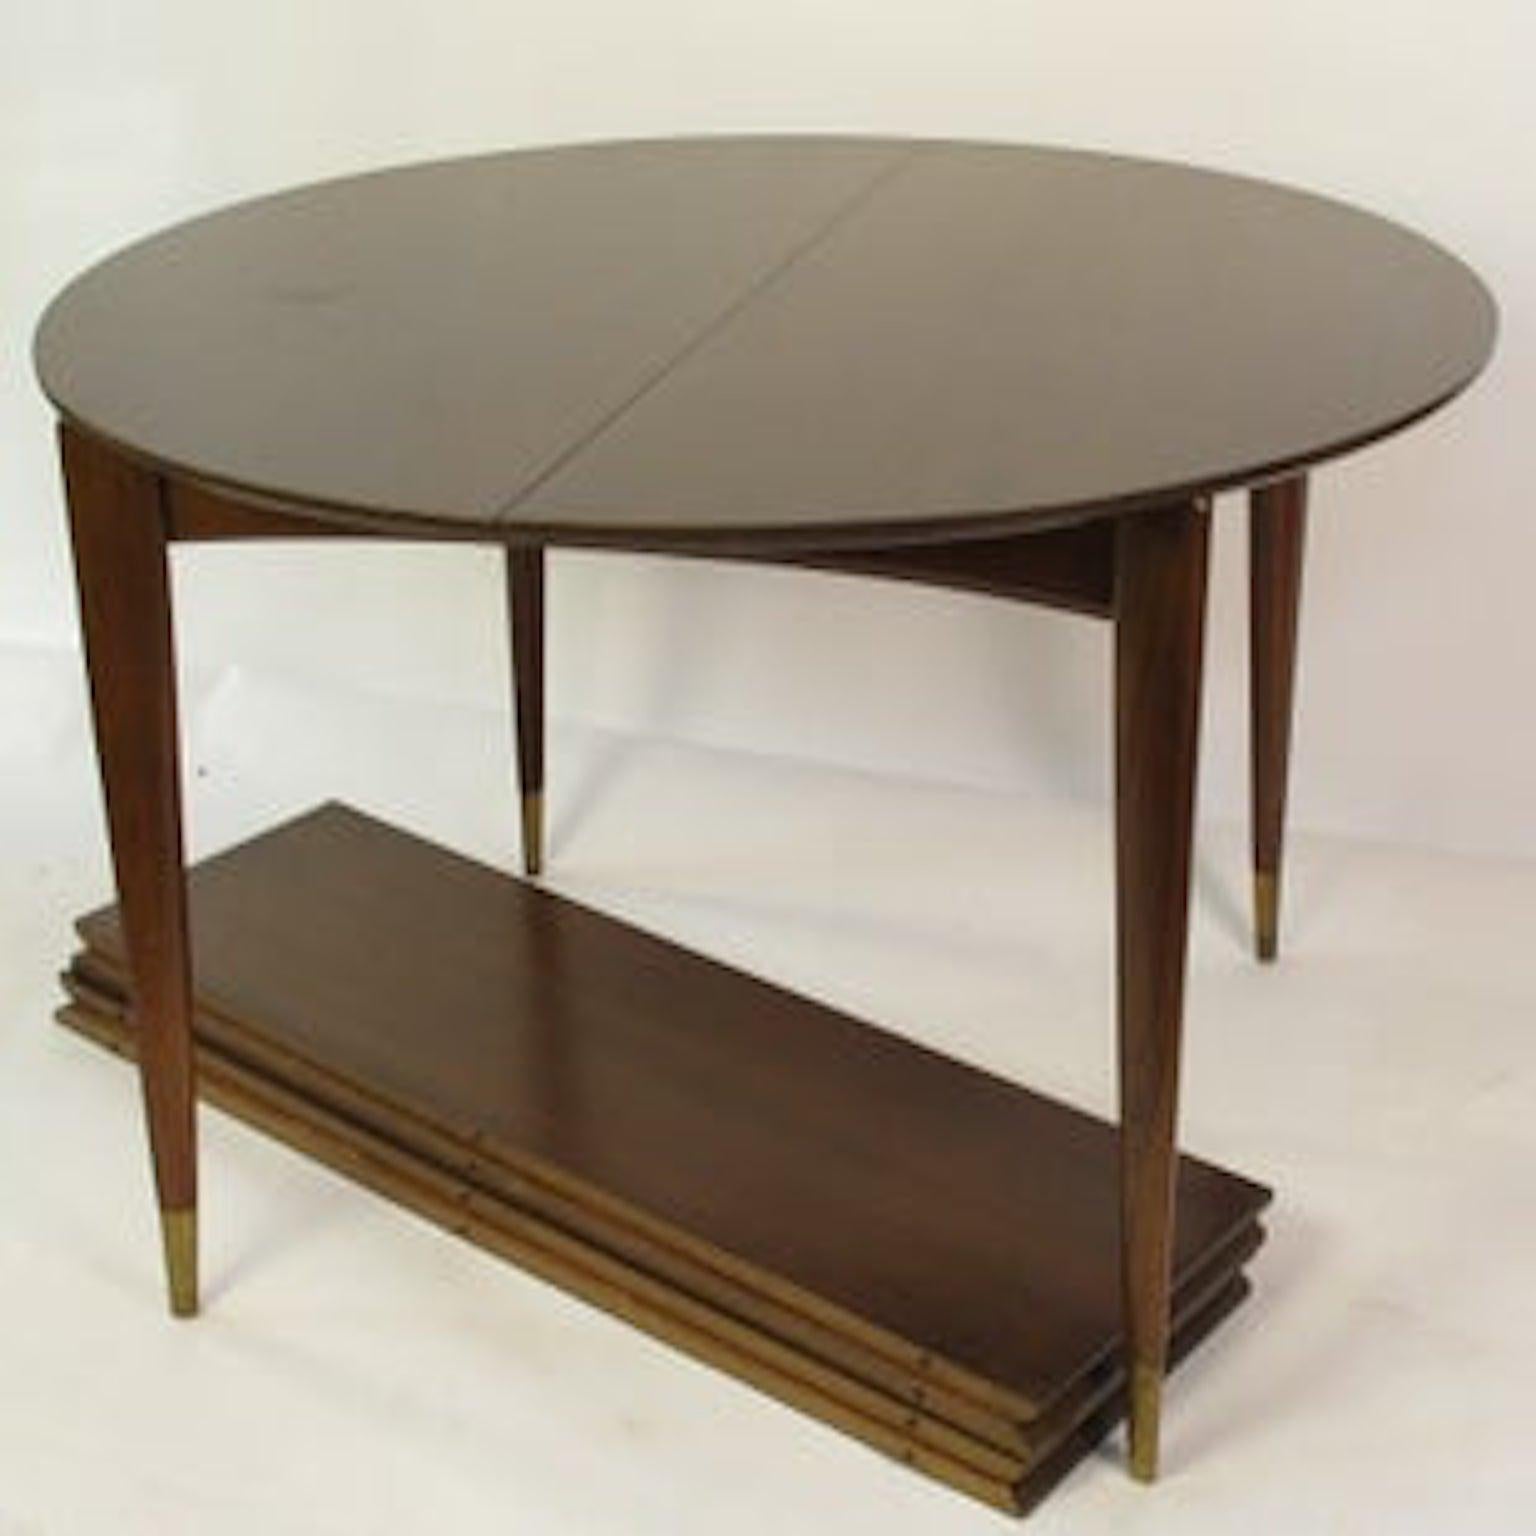 Midcentury walnut dining table made in America by Singer and Sons. Beautiful tapered legs each leg has a brass shoe which need to be refinished. The size is perfect for small dining room. Four individual leaves can be inserted extending length to